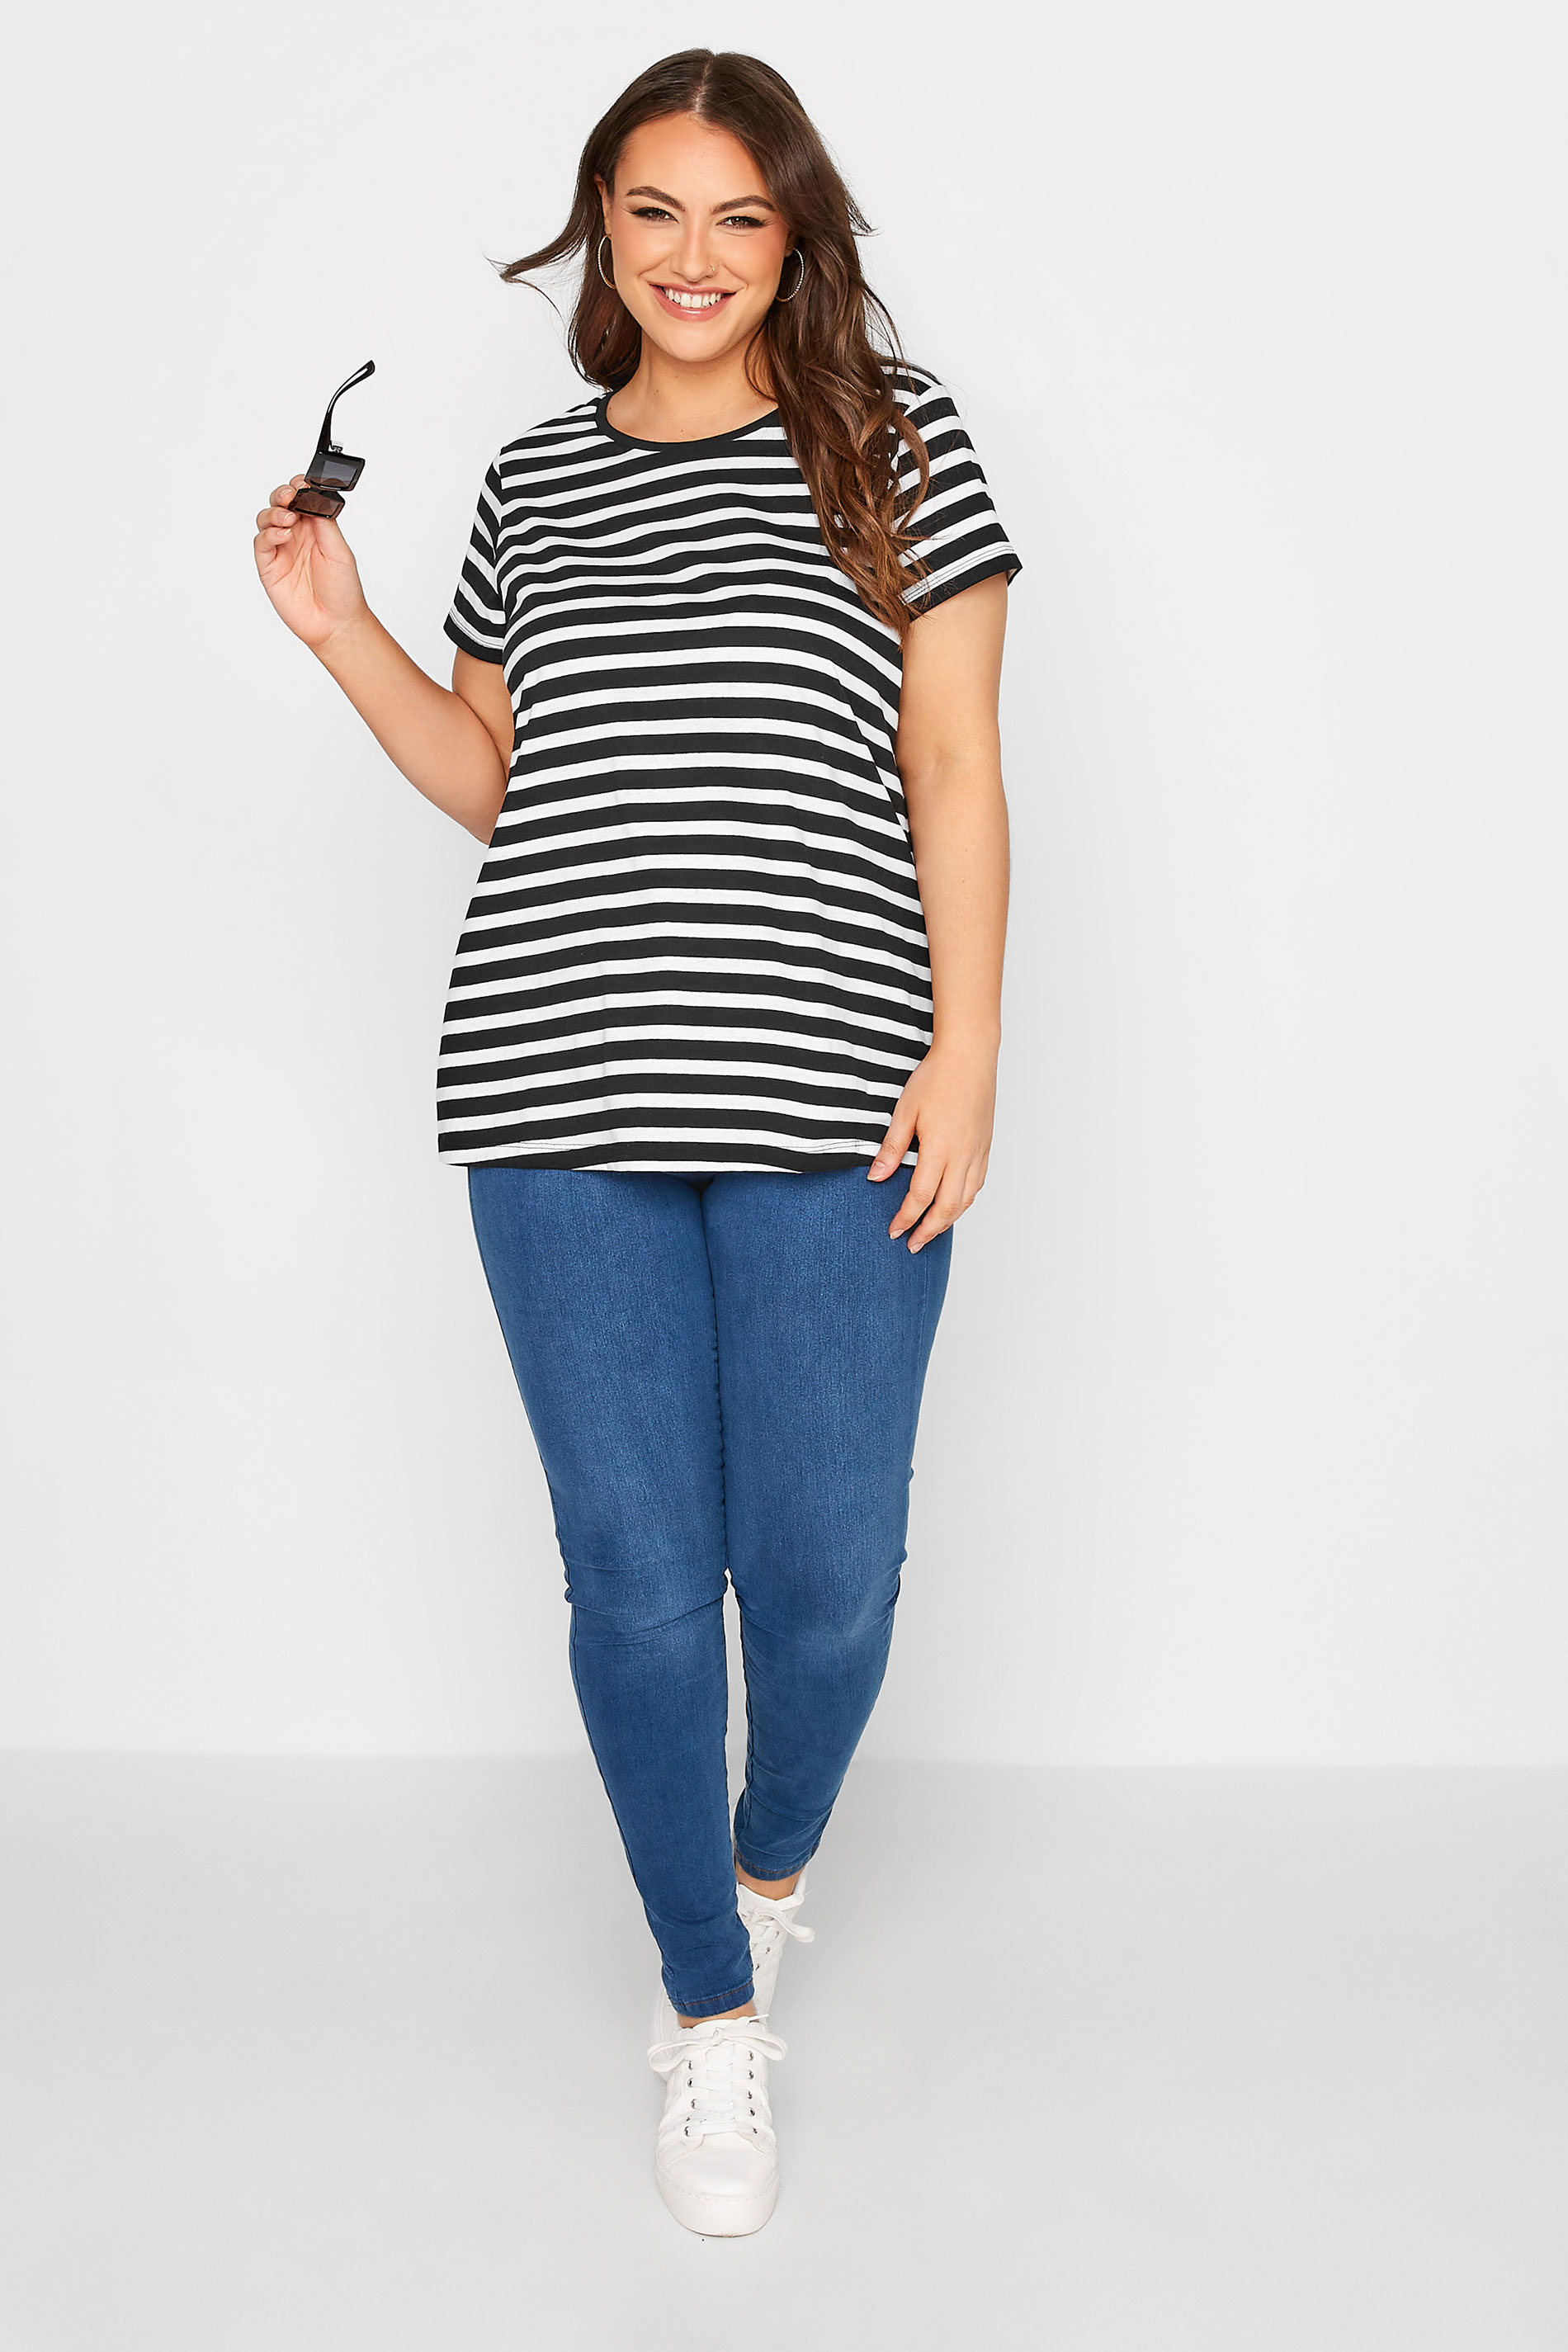 3 PACK Plus Size Black & White & Stripe T-Shirts | Yours Clothing 3